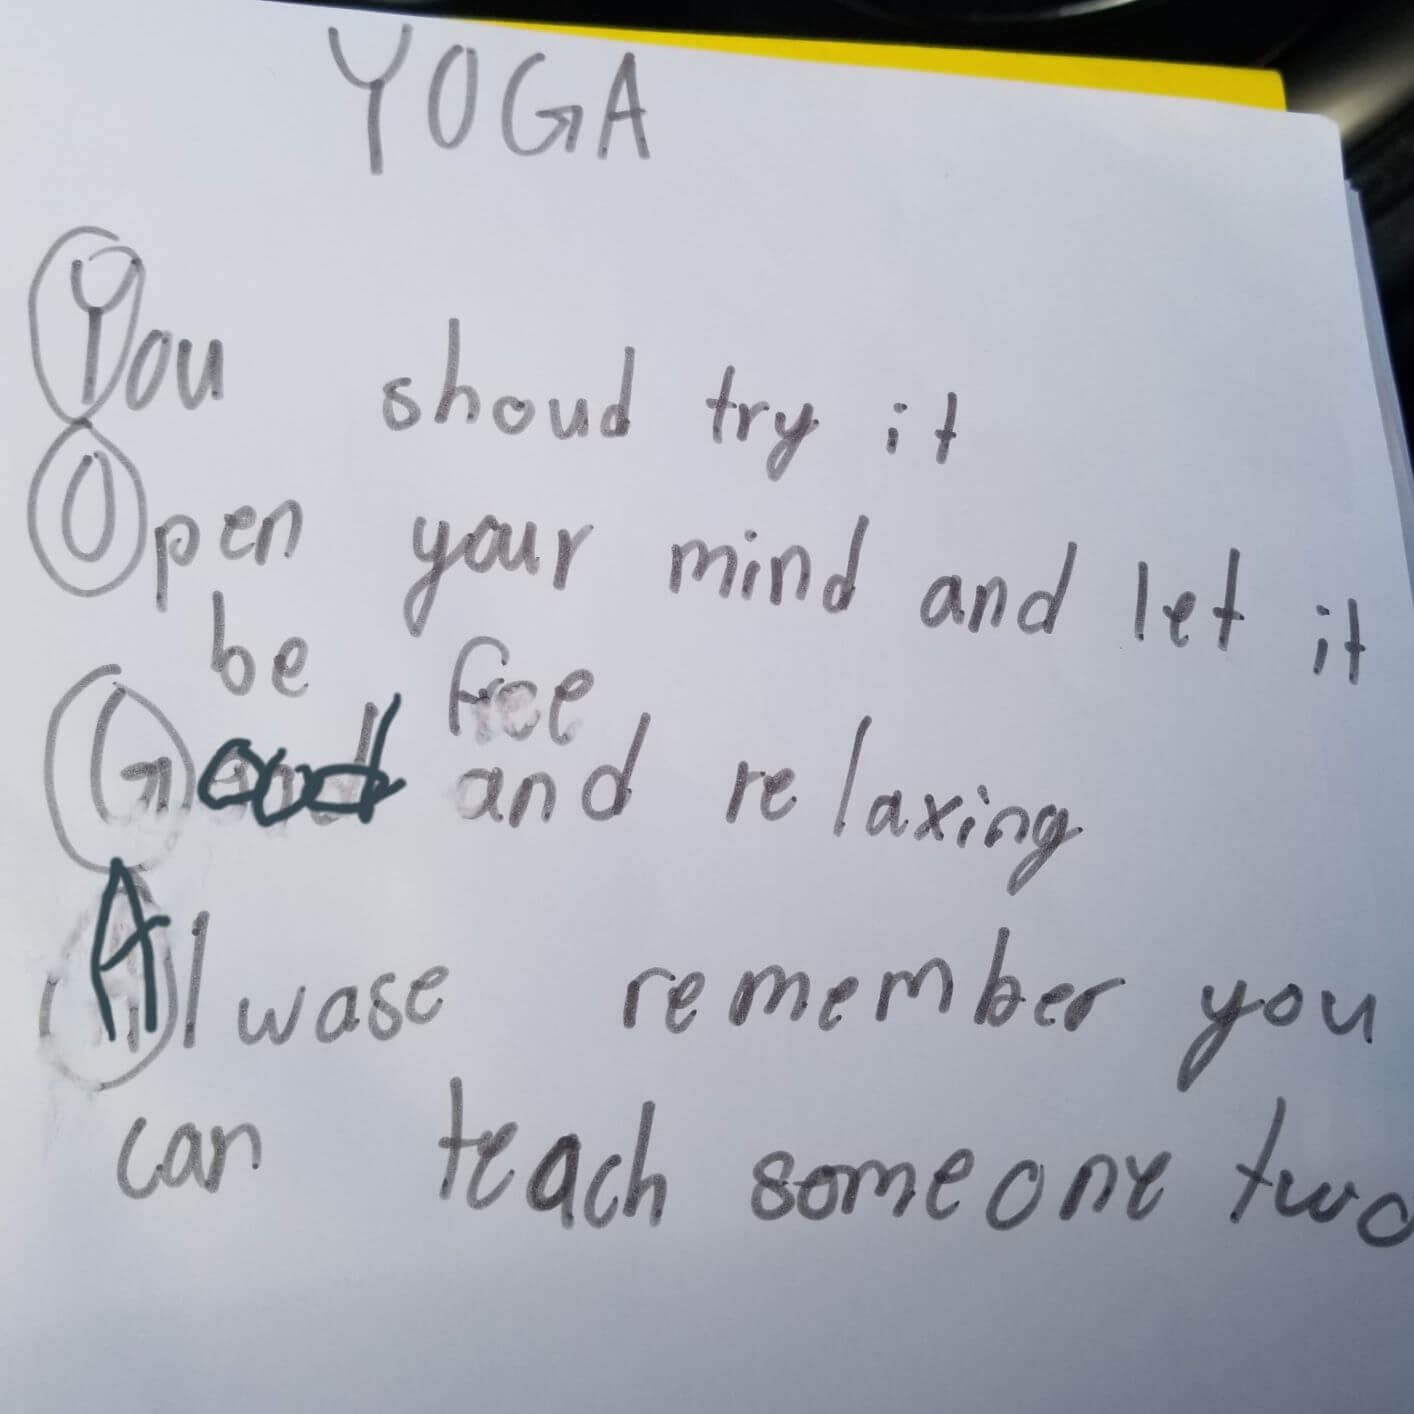 Child's poem about Yoga